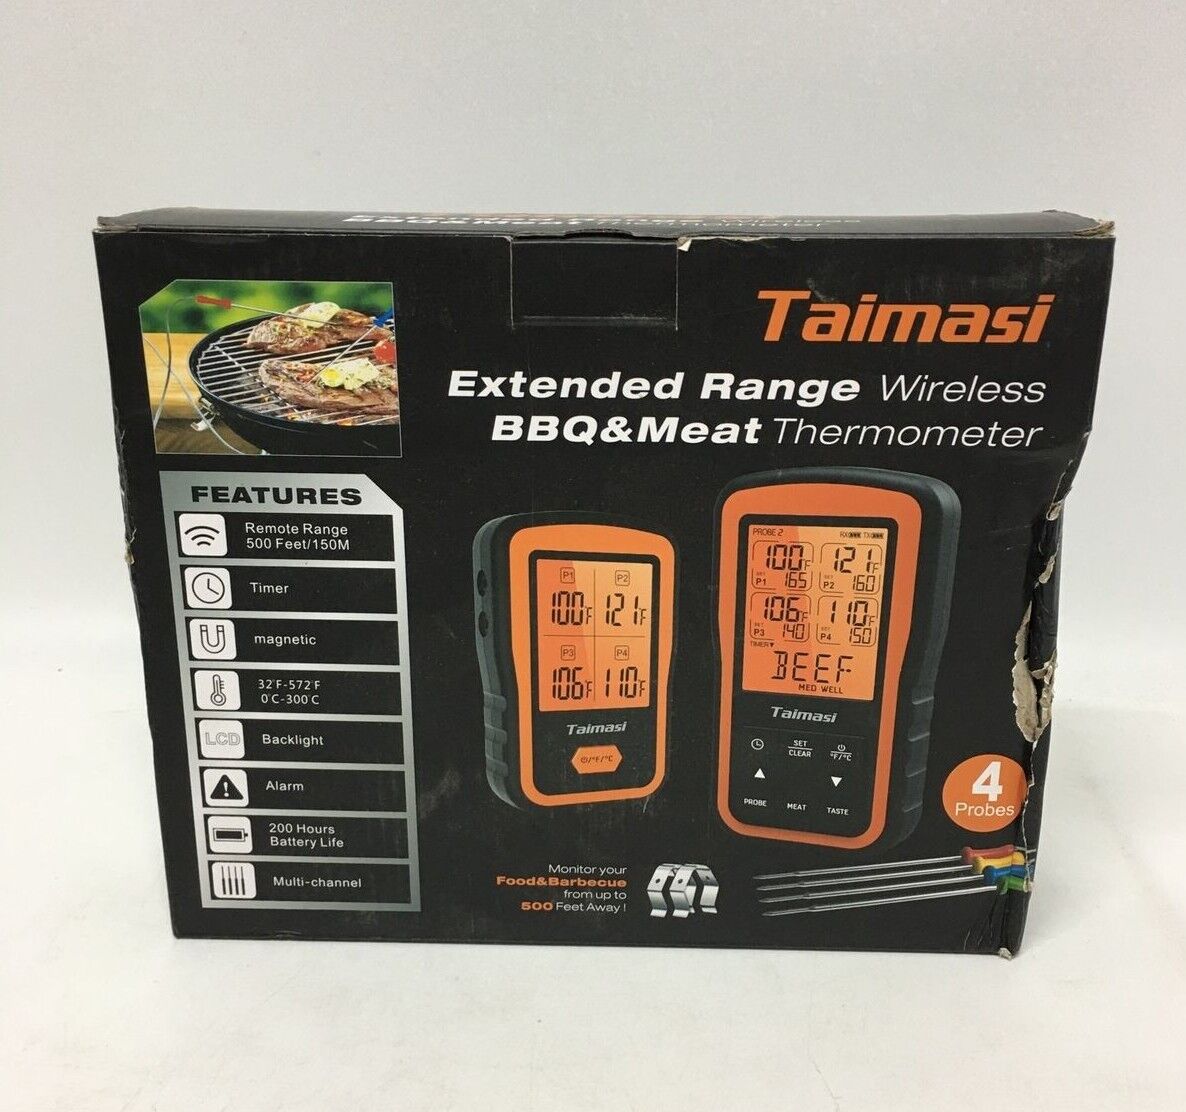 ThermoPro Wireless Meat Thermometer with 4 Probes